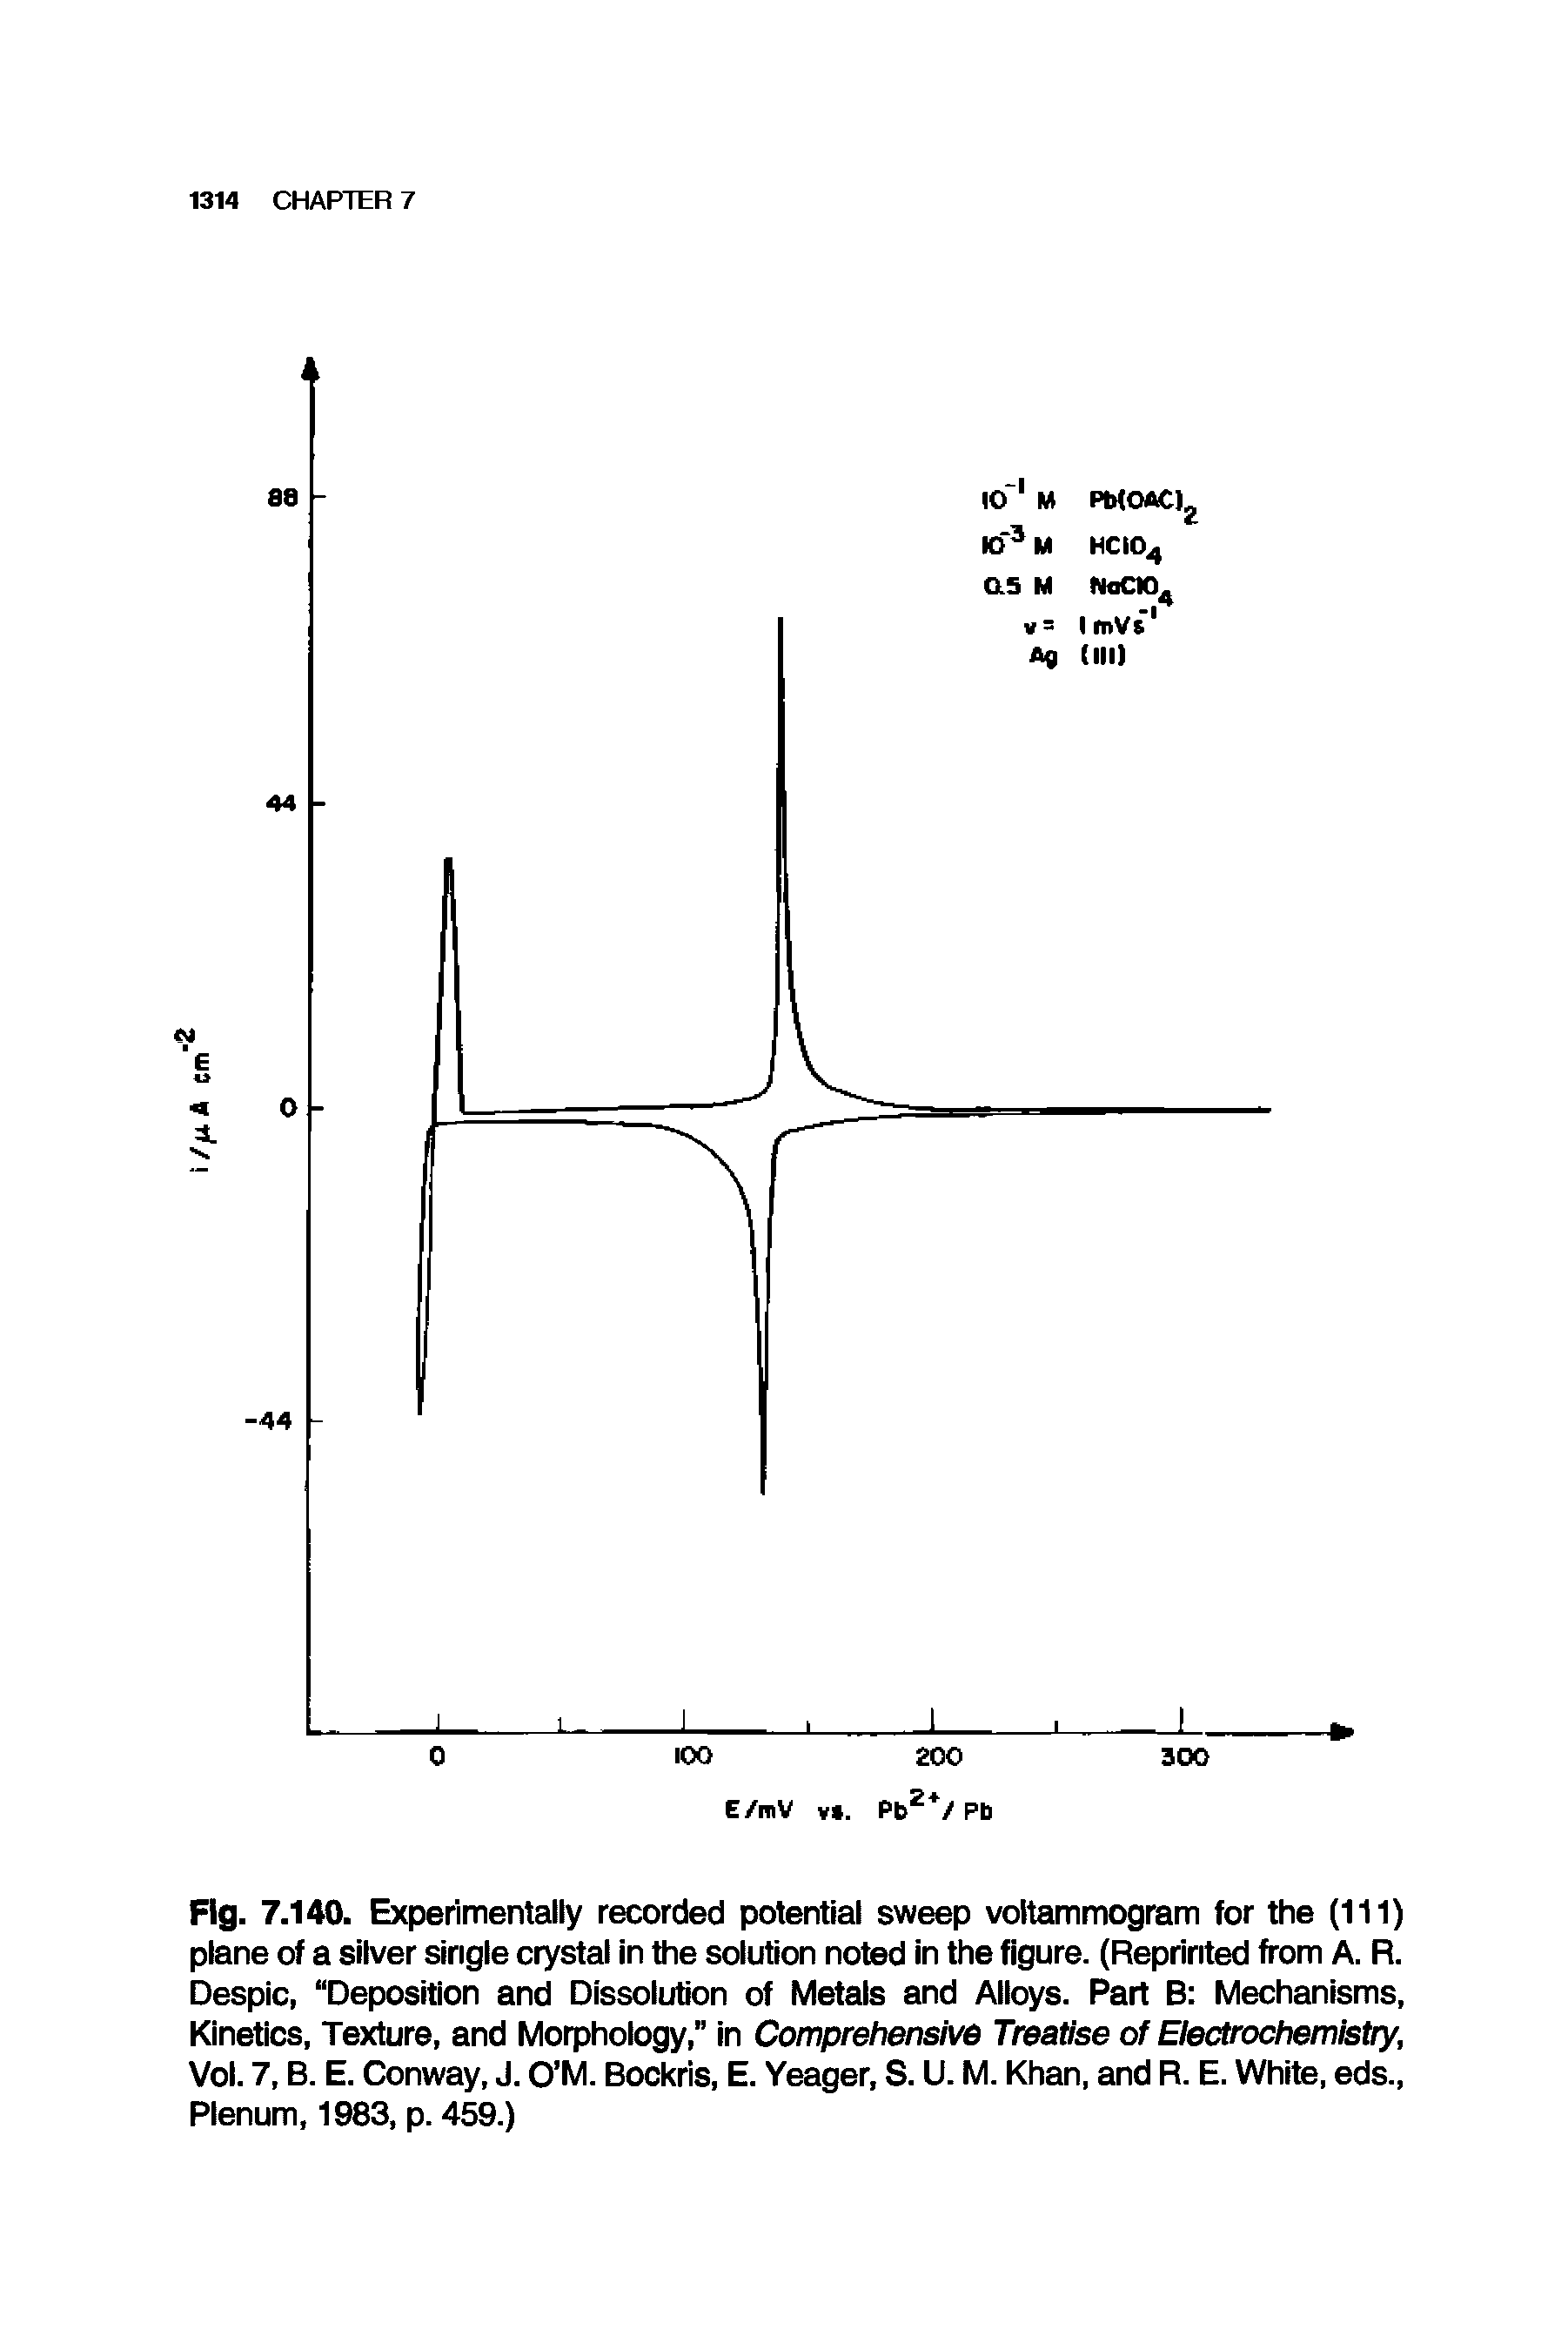 Fig. 7.140. Experimentally recorded potential sweep voltammogram for the (111) plane of a silver single crystal in the solution noted in the figure. (Reprinted from A. R. Despic, Deposition and Dissolution of Metals and Alloys. Part B Mechanisms, Kinetics, Texture, and Morphology, in Comprehensive Treatise of Electrochemistry, Vol. 7, B. E. Conway, J. O M. Bockris, E. Yeager, S. U. M. Khan, and R. E. White, eds., Plenum, 1983, p. 459.)...